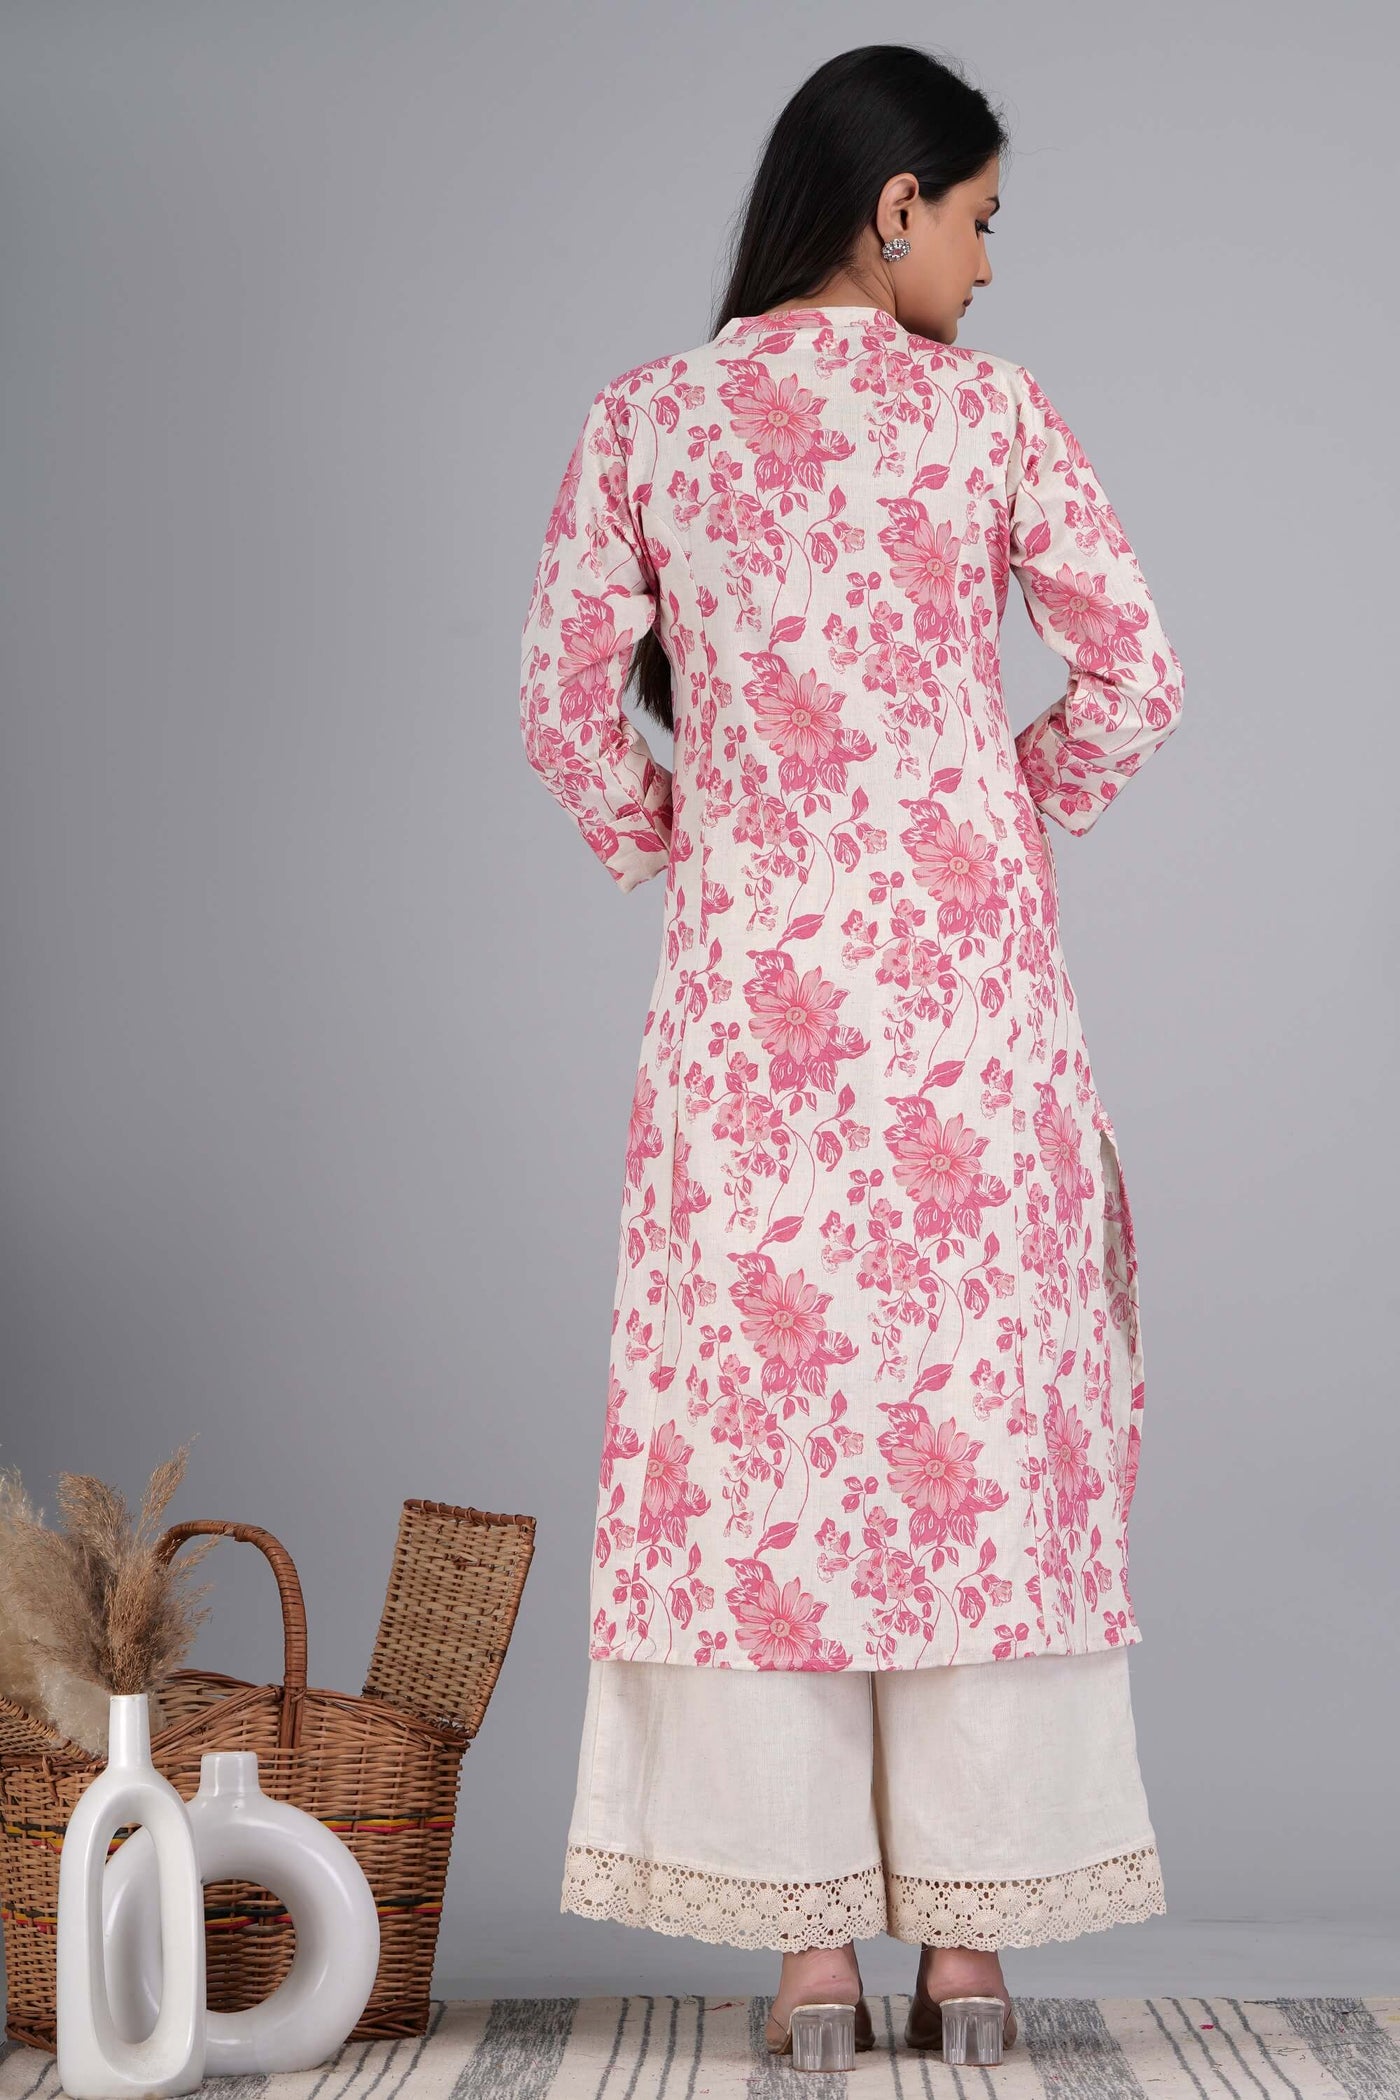 Classy Pink Floral Printed Cotton Kurta with Plazo Set for Women